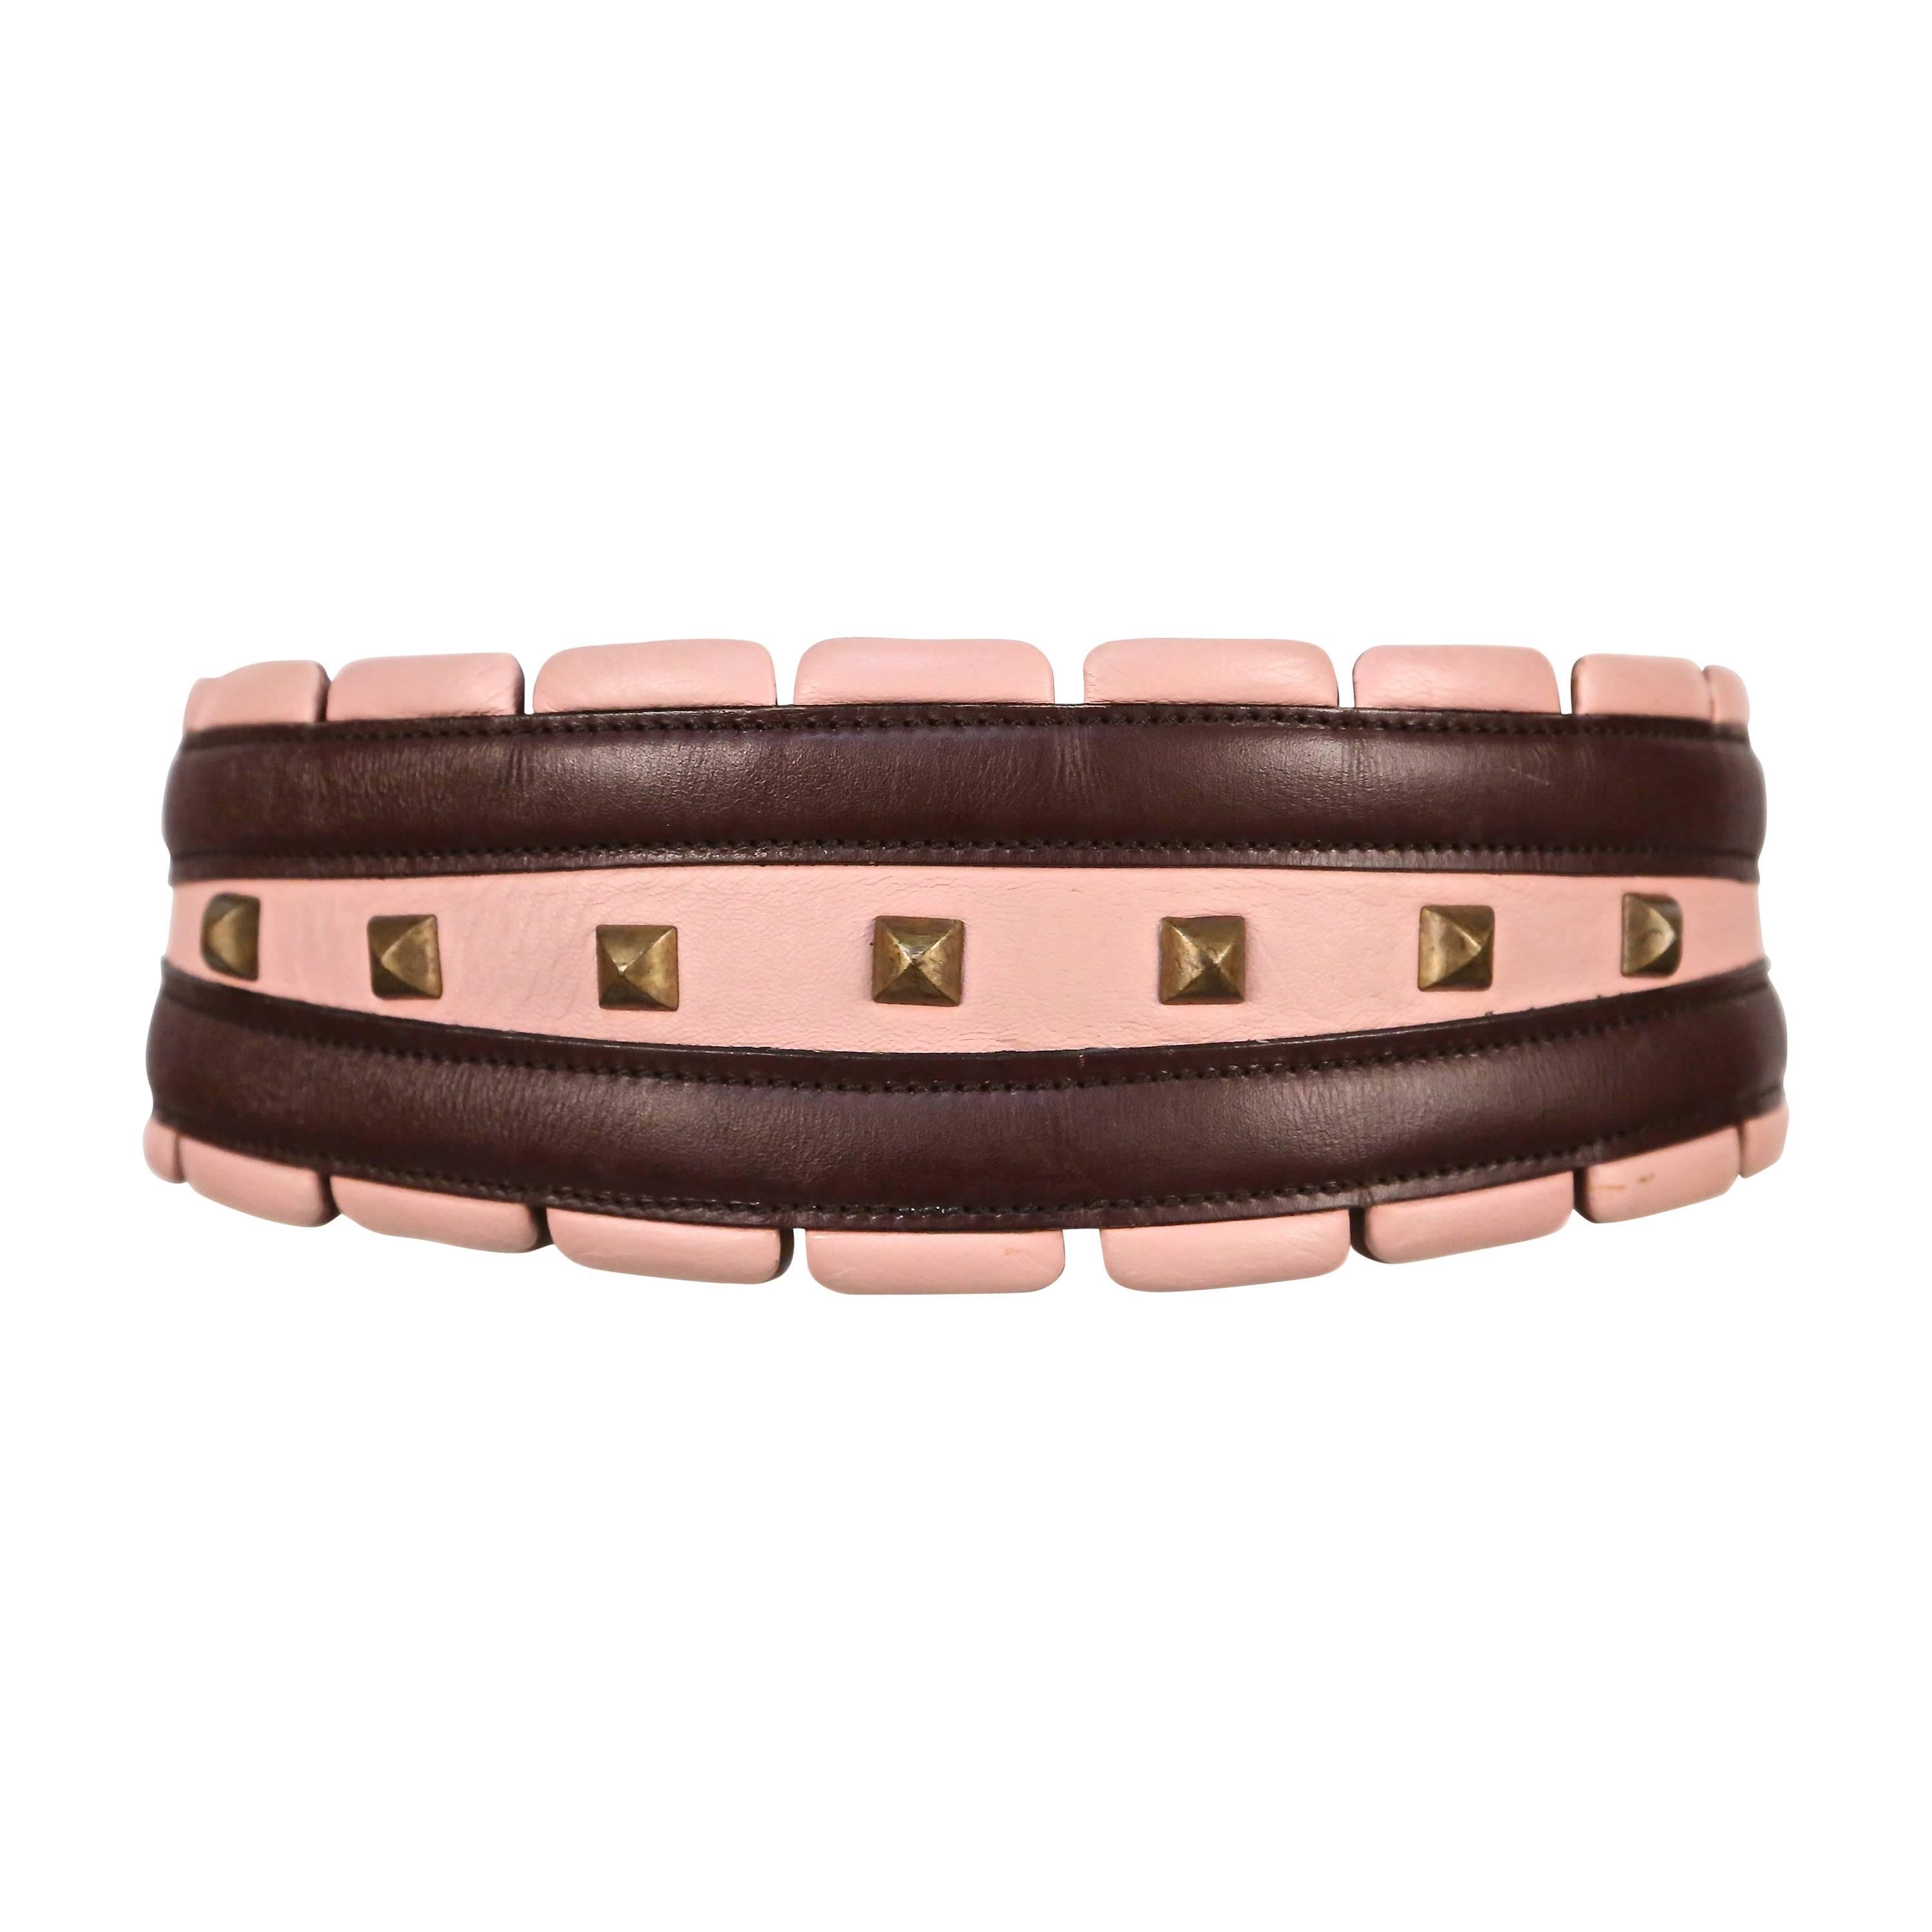 1990's AZZEDINE ALAIA burgundy and pink leather belt with silver pyramid studs